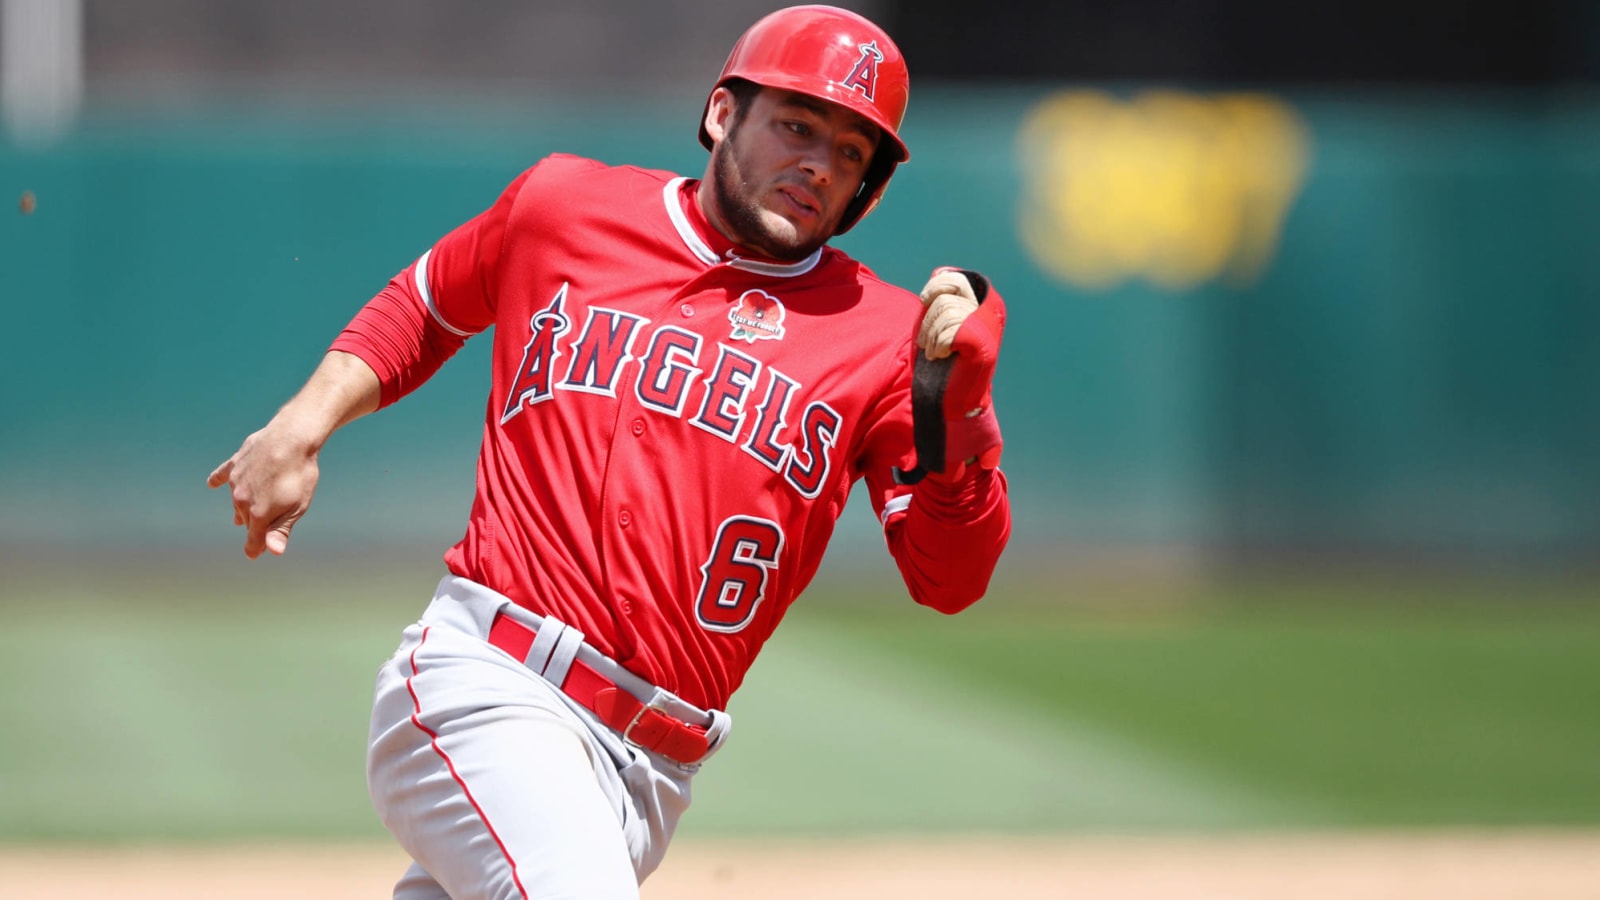 Angels' utilityman David Fletcher is the hitter who can't miss